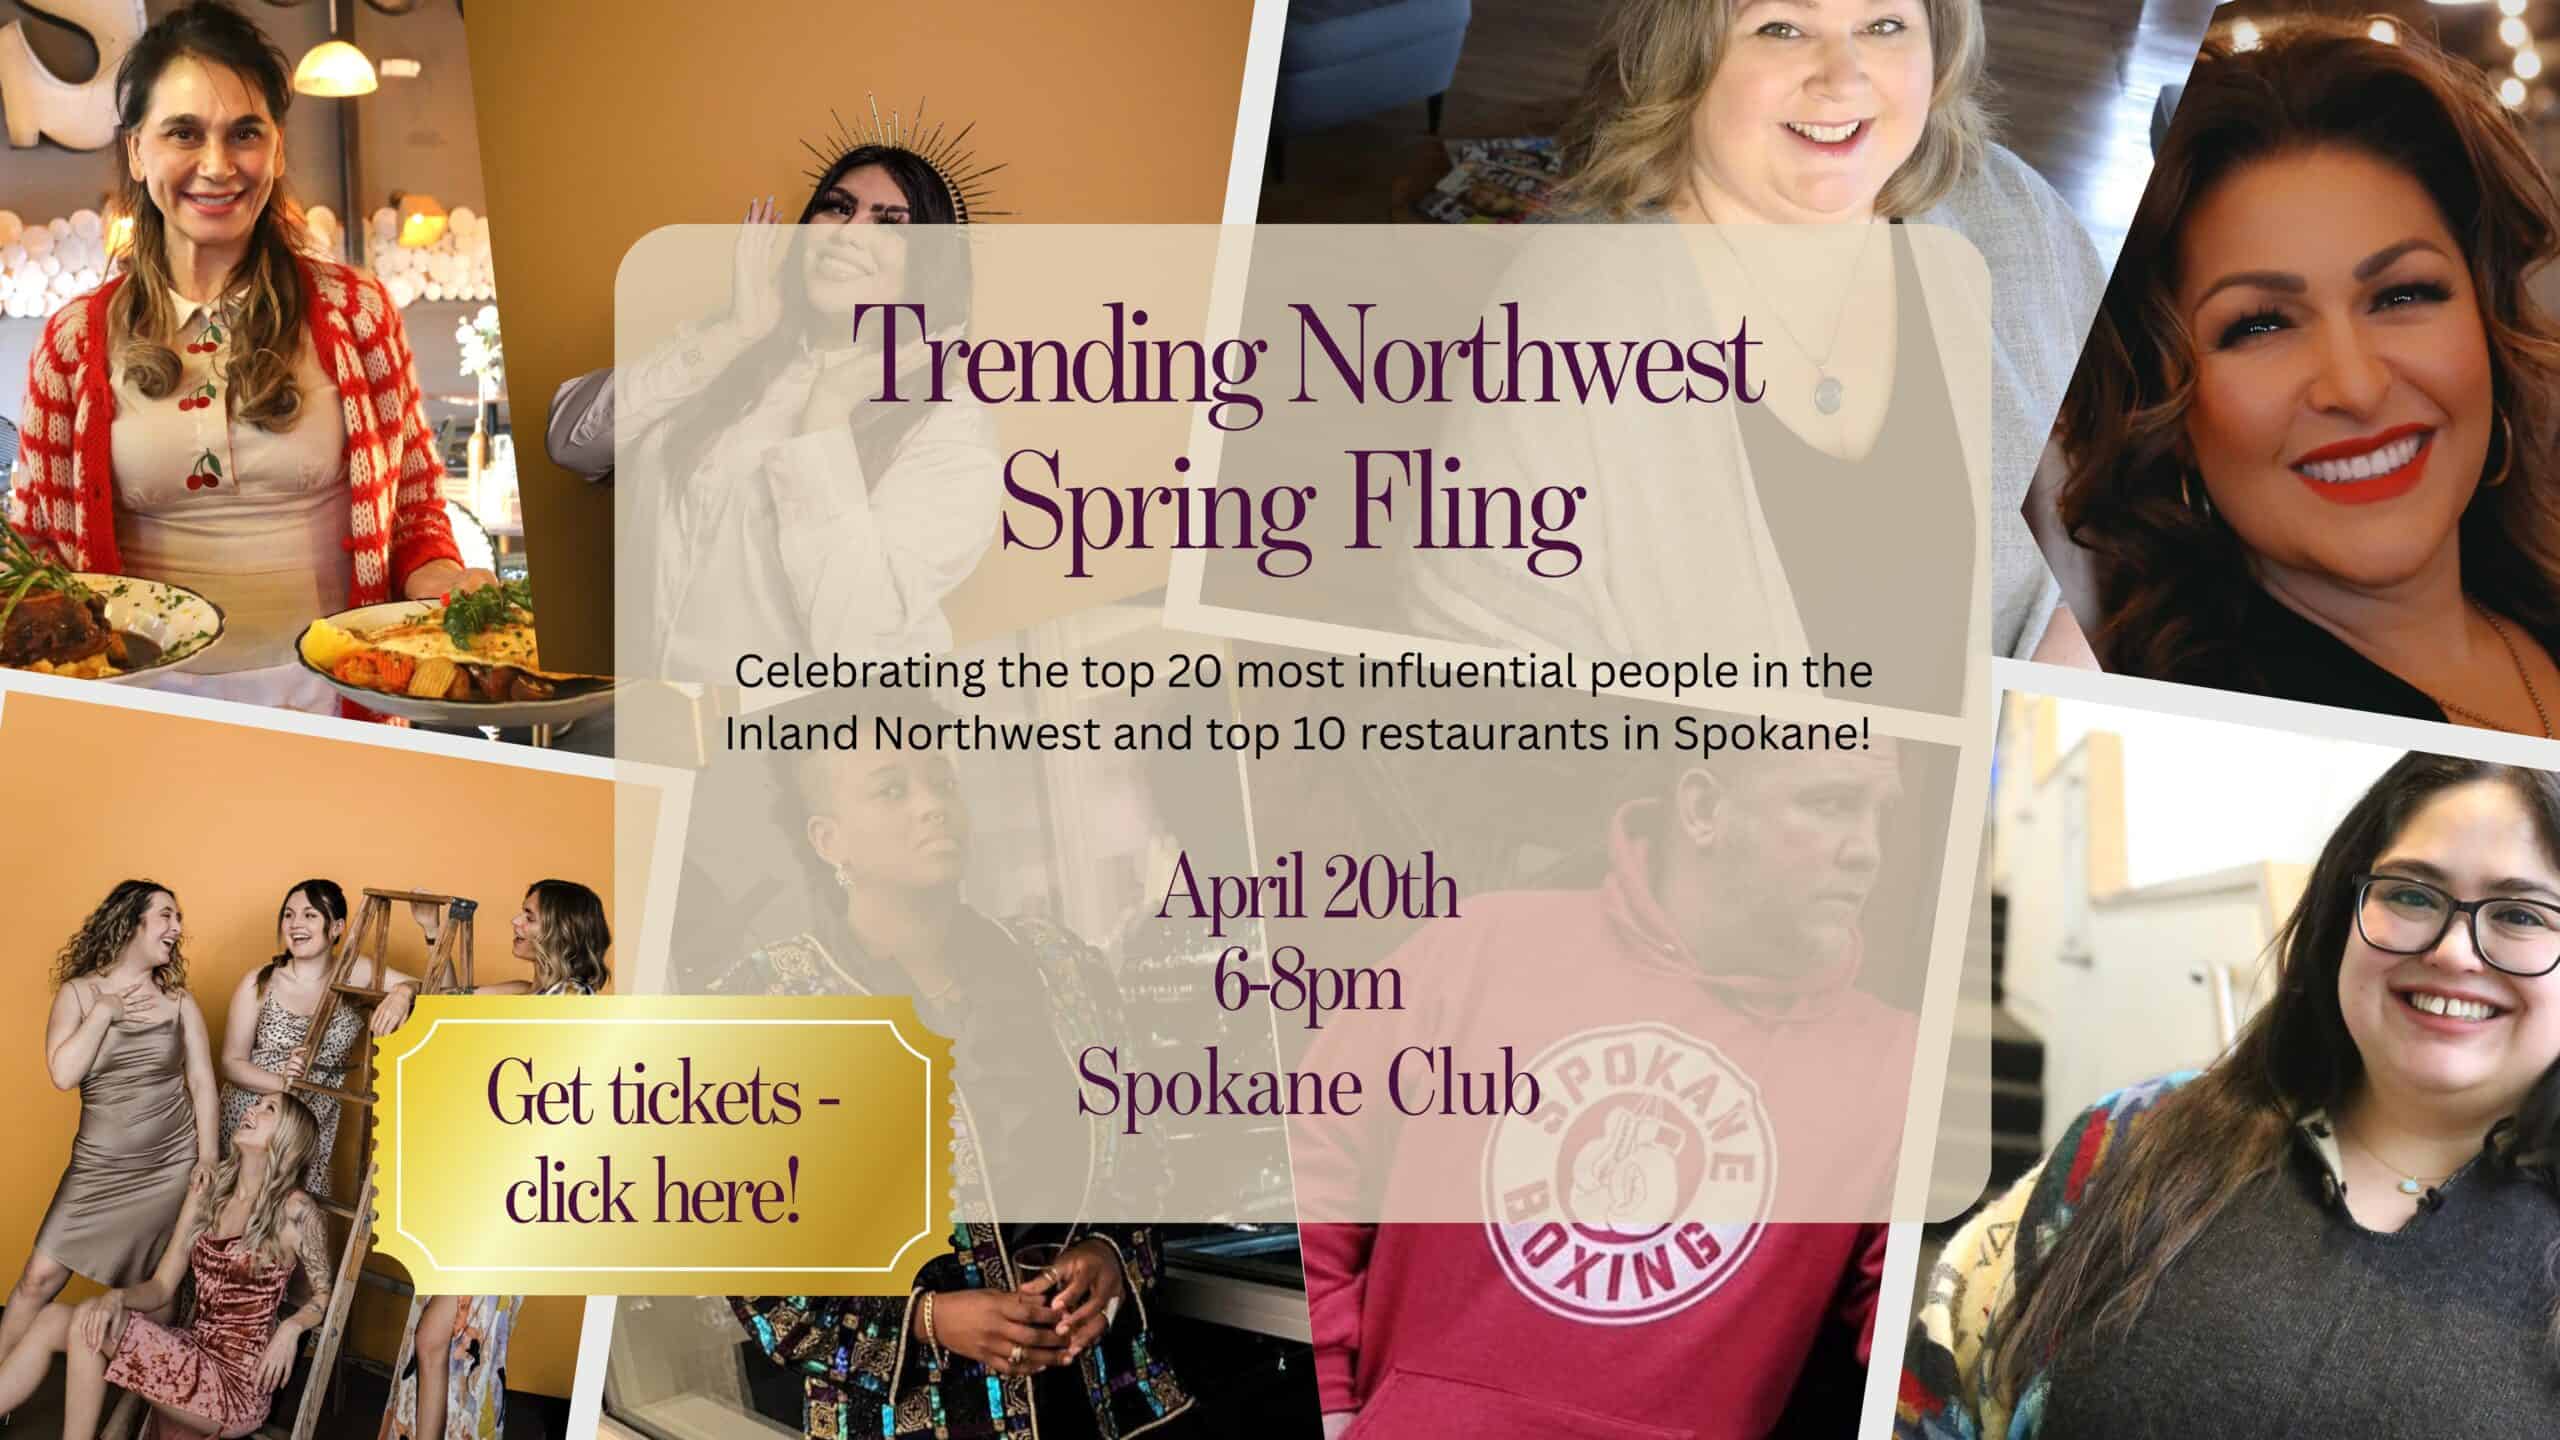 an add for the trending northwest spring fling magazine event to be held April 20